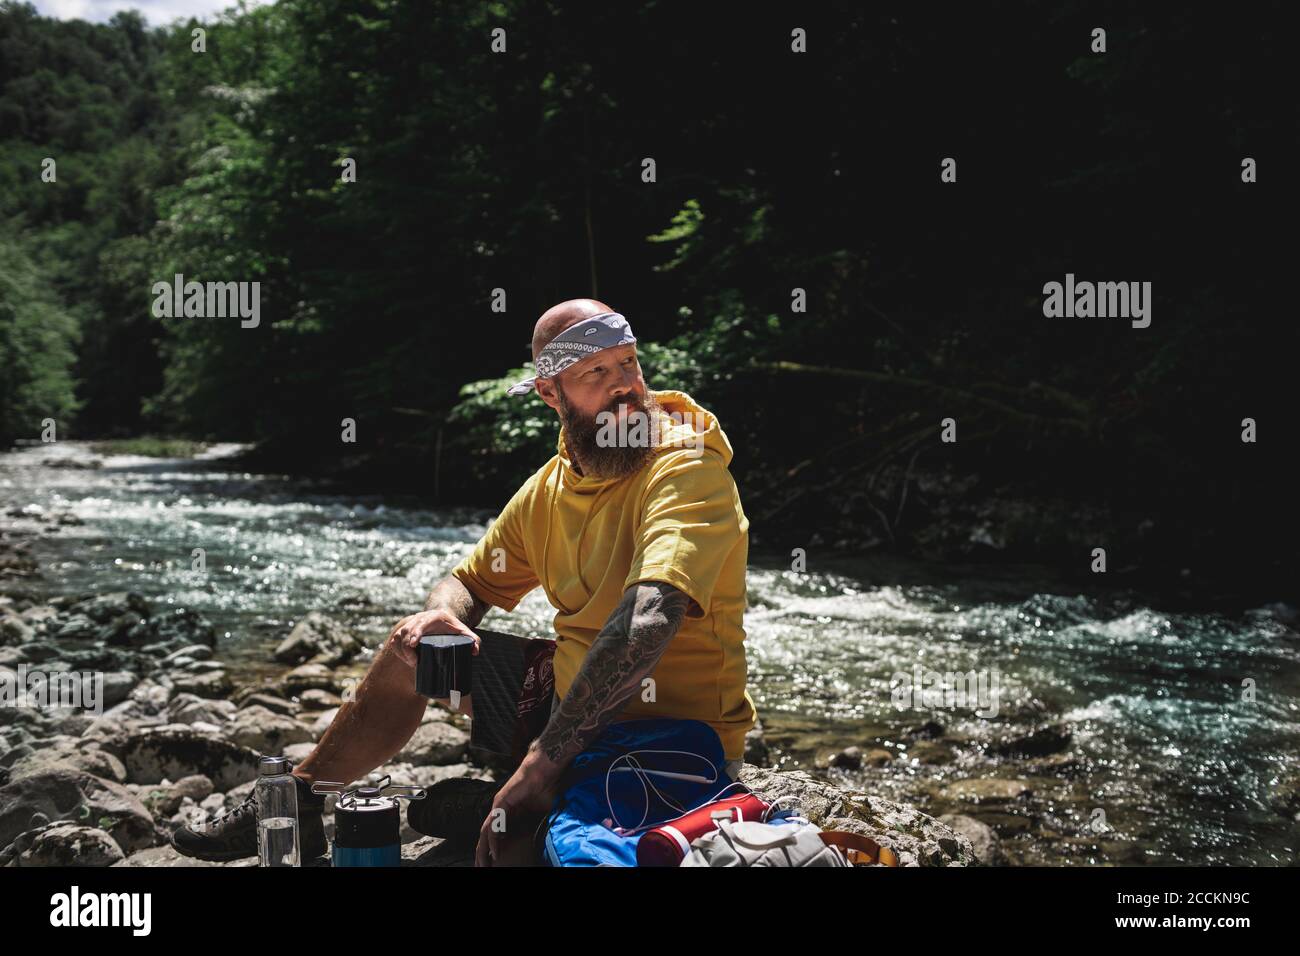 Hiker with full beard and yellow hoodie during break, cooking tea at riverside Stock Photo